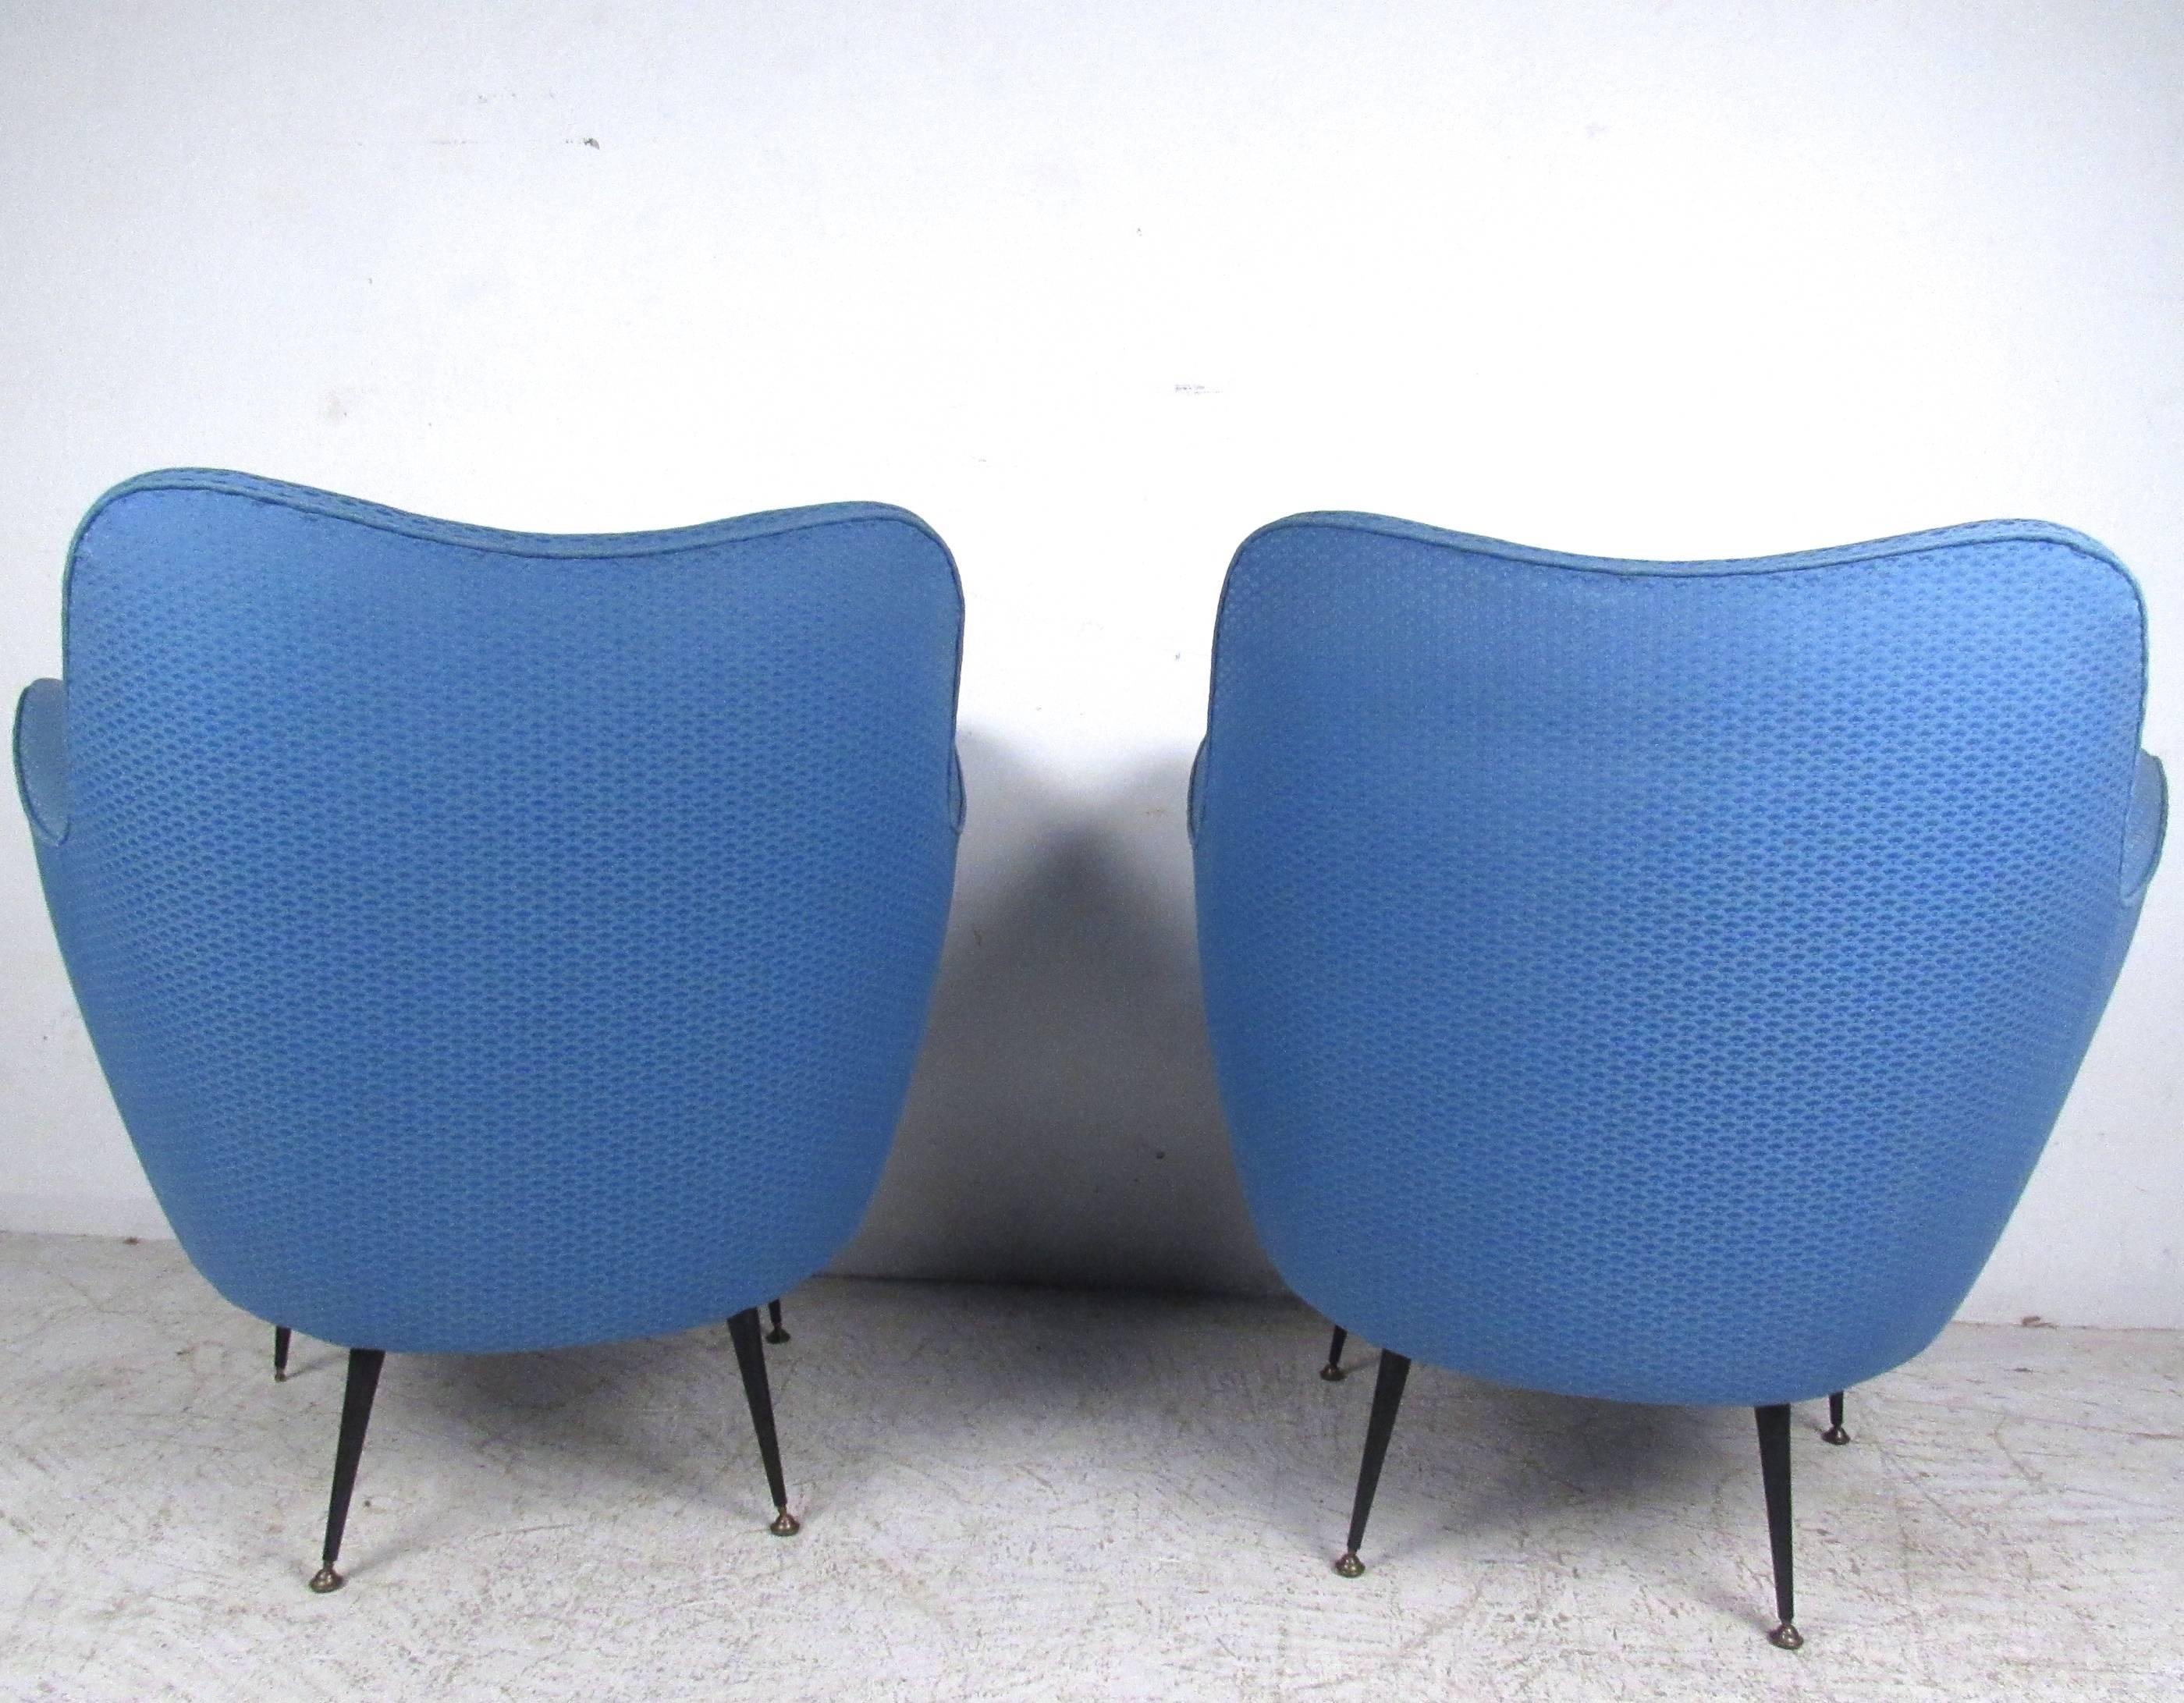 Mid-20th Century Pair of Italian Modern Sculpted Lounge Chairs